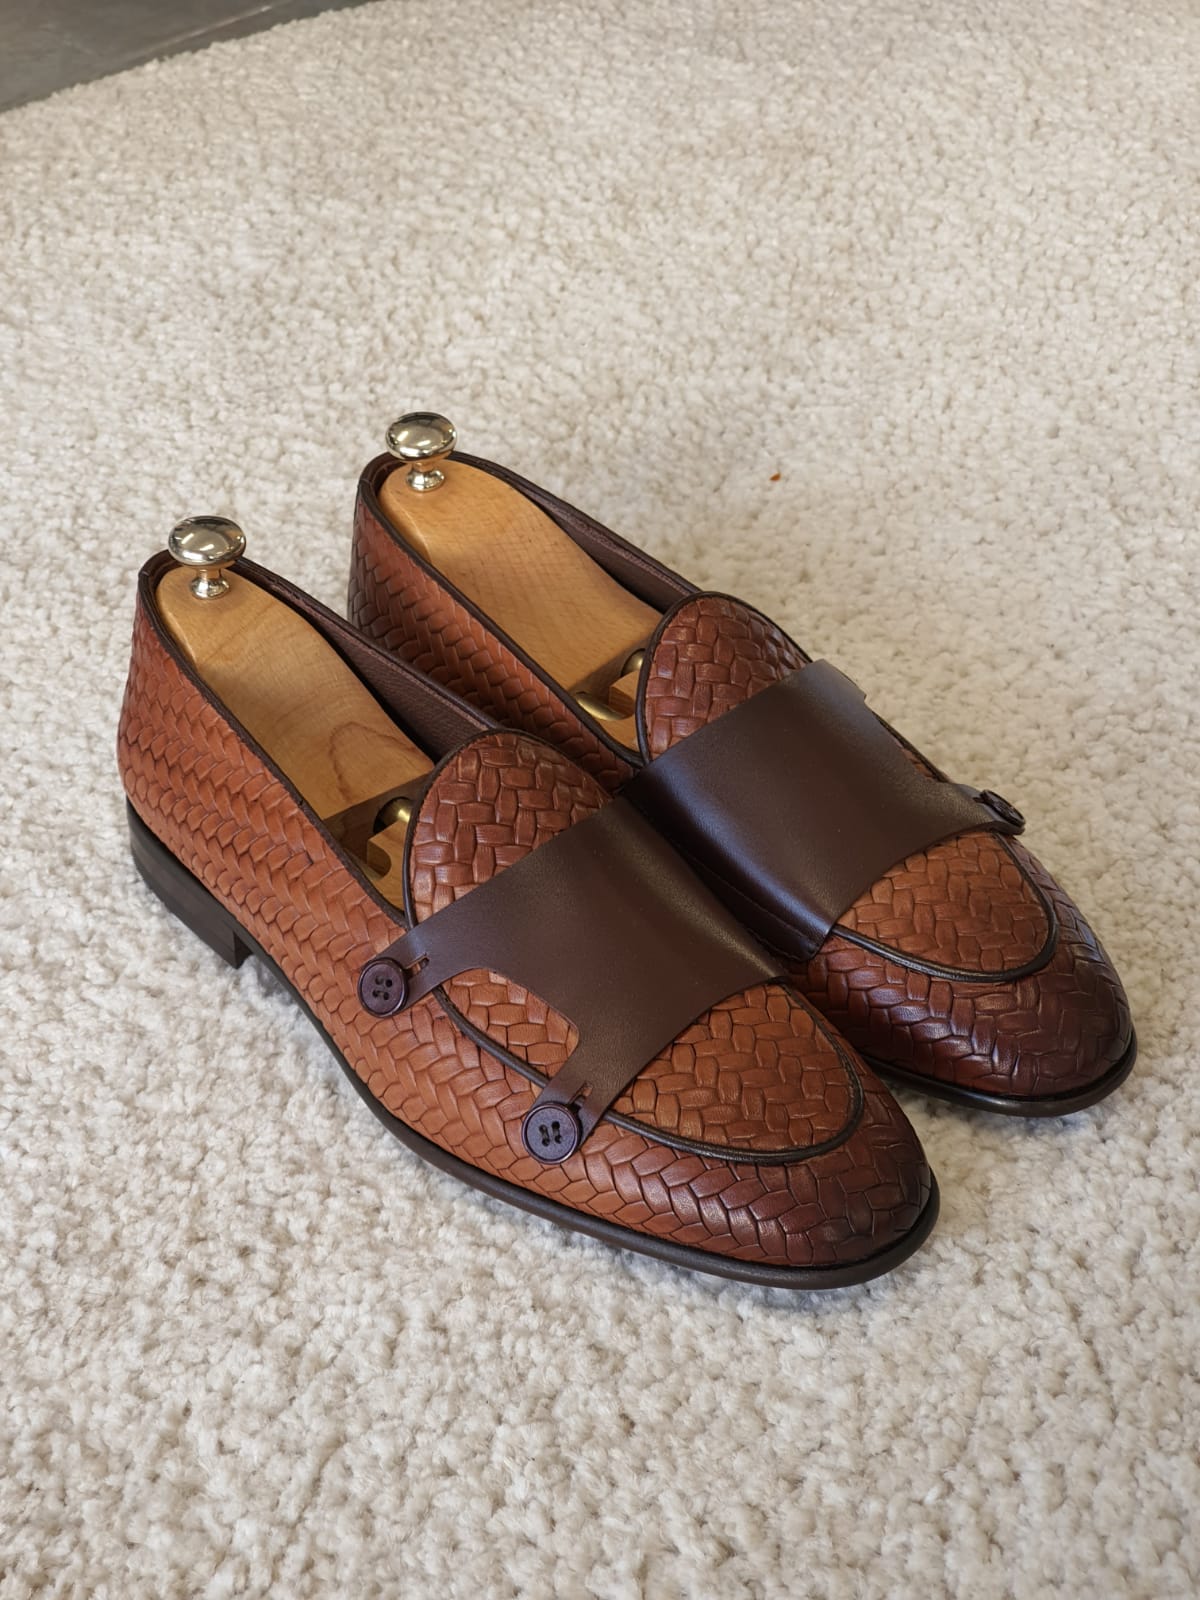 SARDINELLI TAN WITH DOUBLE BUTTON KNIT LEATHER LOAFERS